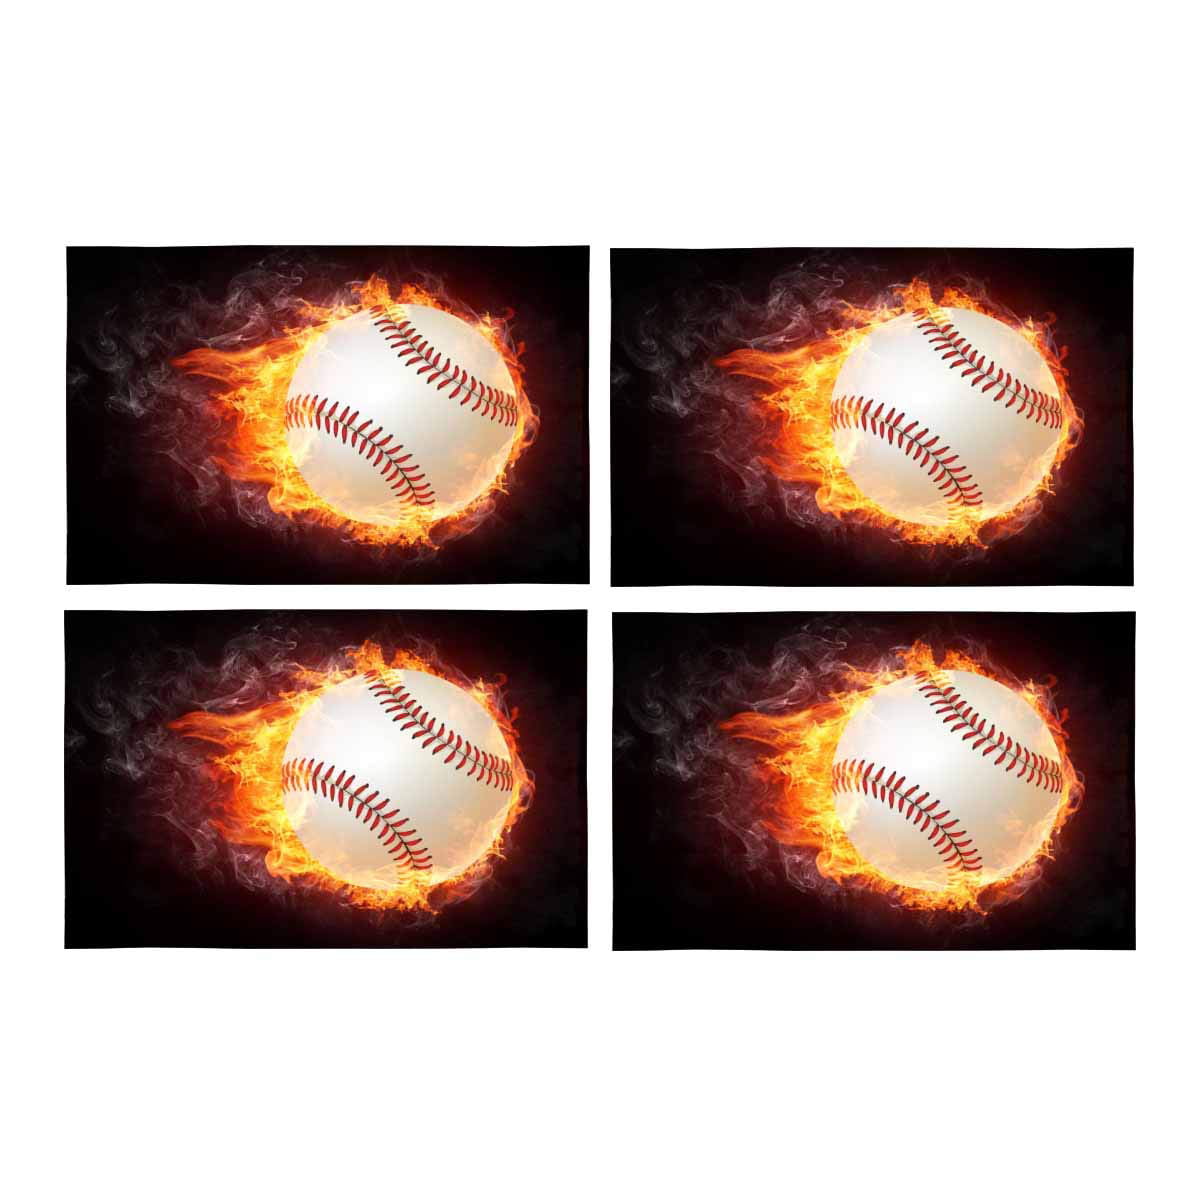 MKHERT Cool Sports Baseball Ball in Fire Flames Placemats Table Mats for  Dining Room Kitchen Table Decoration 12x18 inch,Set of 4 